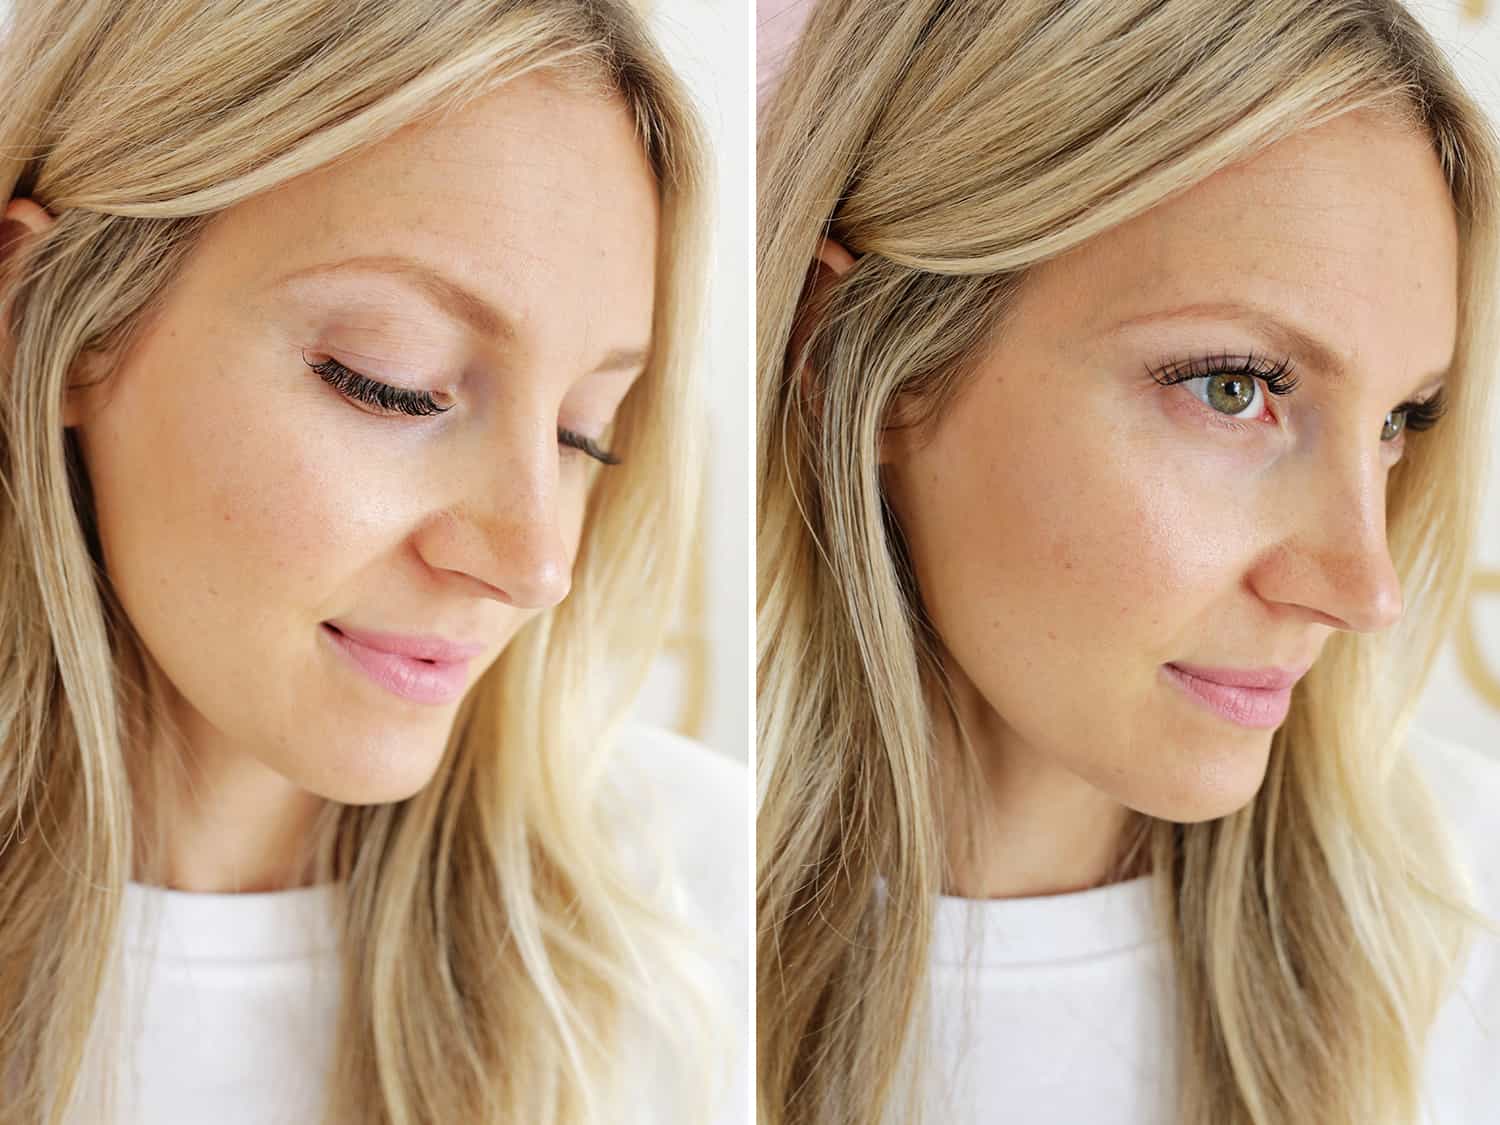 2 photos of a woman with eyelashes on, one with eyes closed and one with eyes opened